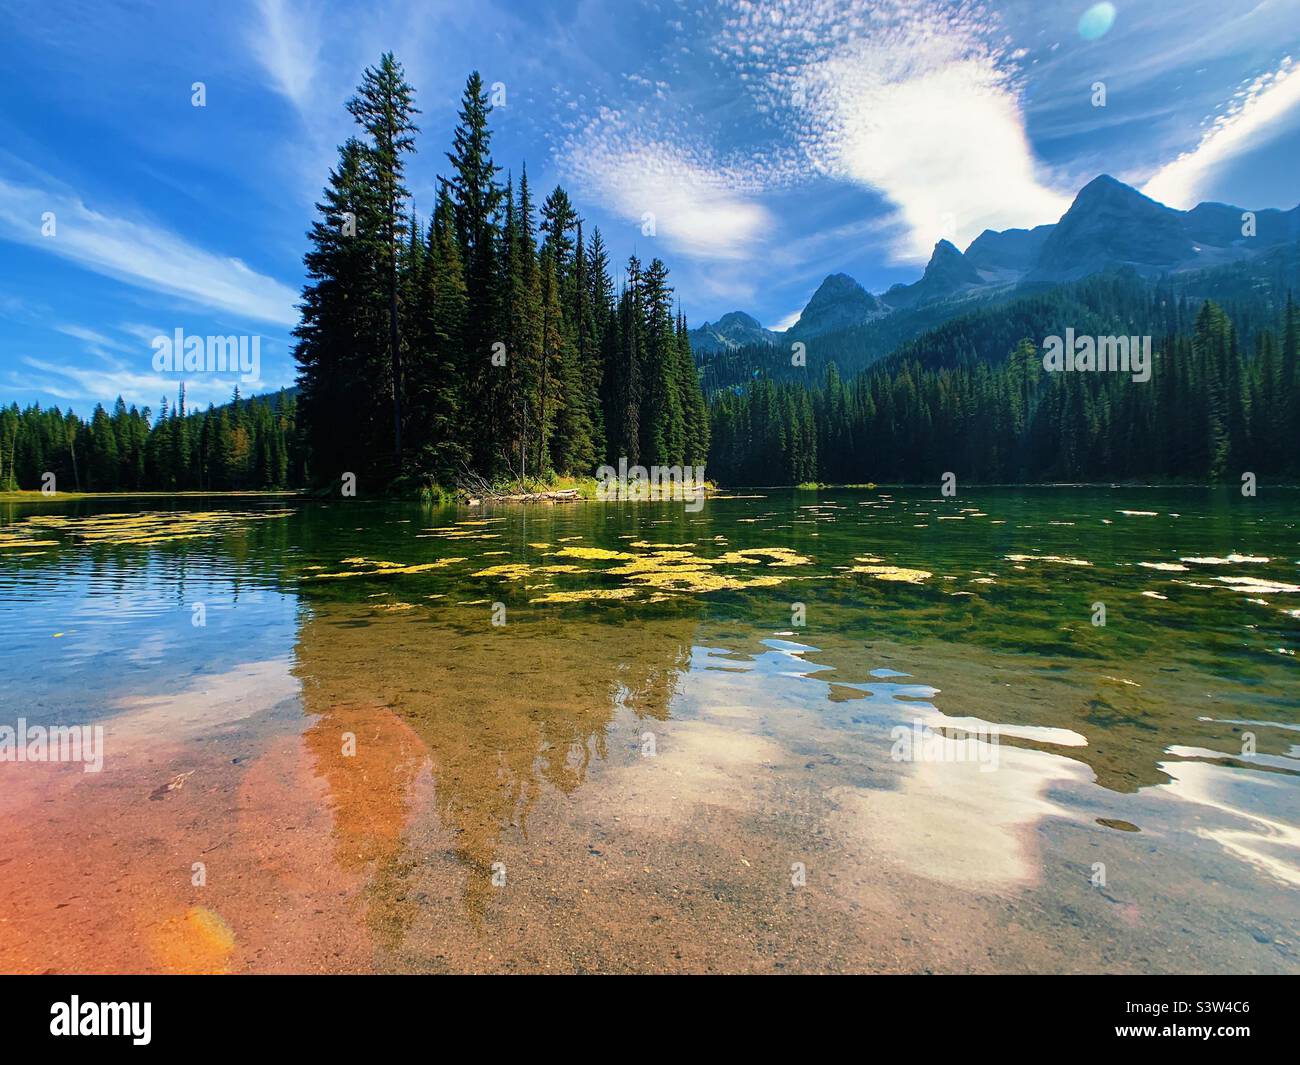 A beautiful mountain lake in the middle of summer. Stock Photo